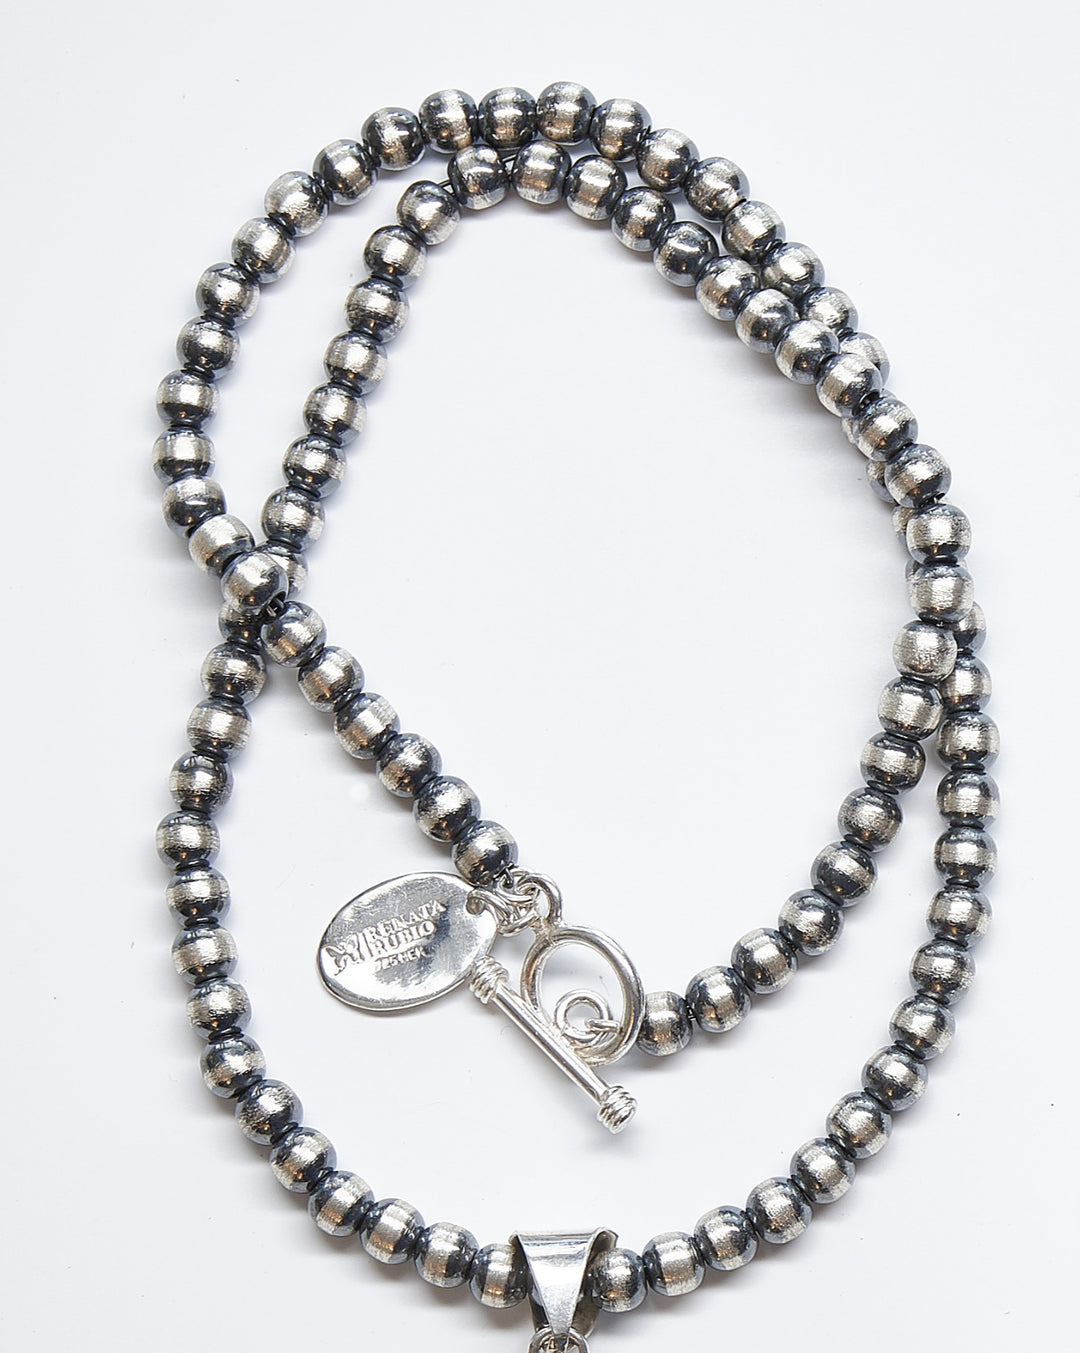 Oxidized Silver Beaded Necklace